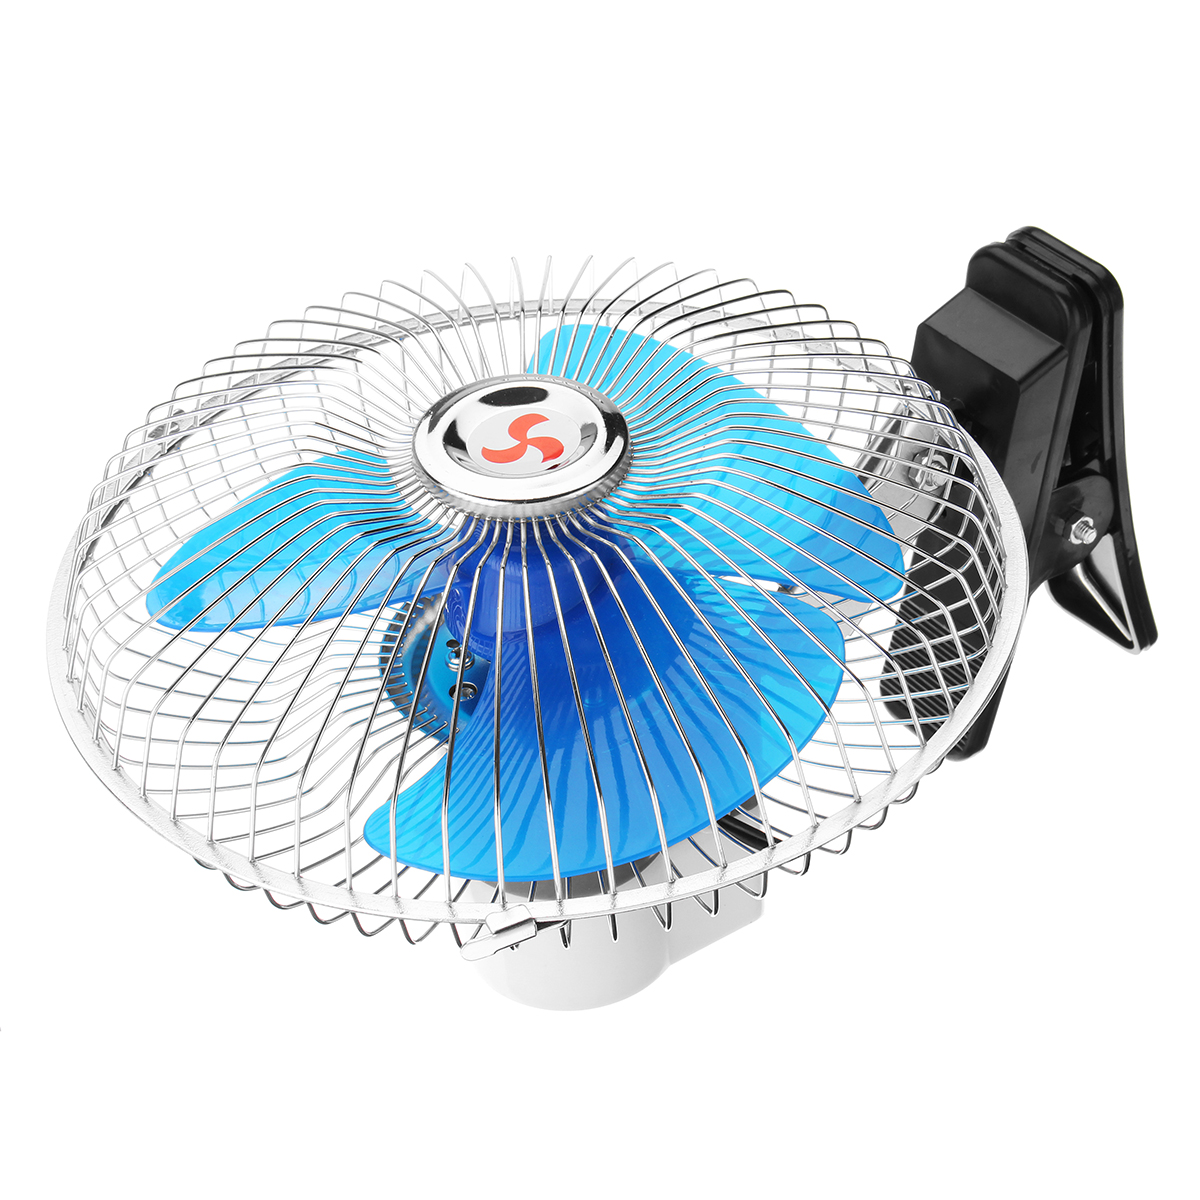 8-Inch-12V-Mini-Electric-Oscillating-Air-Cooling-Fan-Clip-Conditioner-Cooler-Fan-For-Auto-Truck-1330259